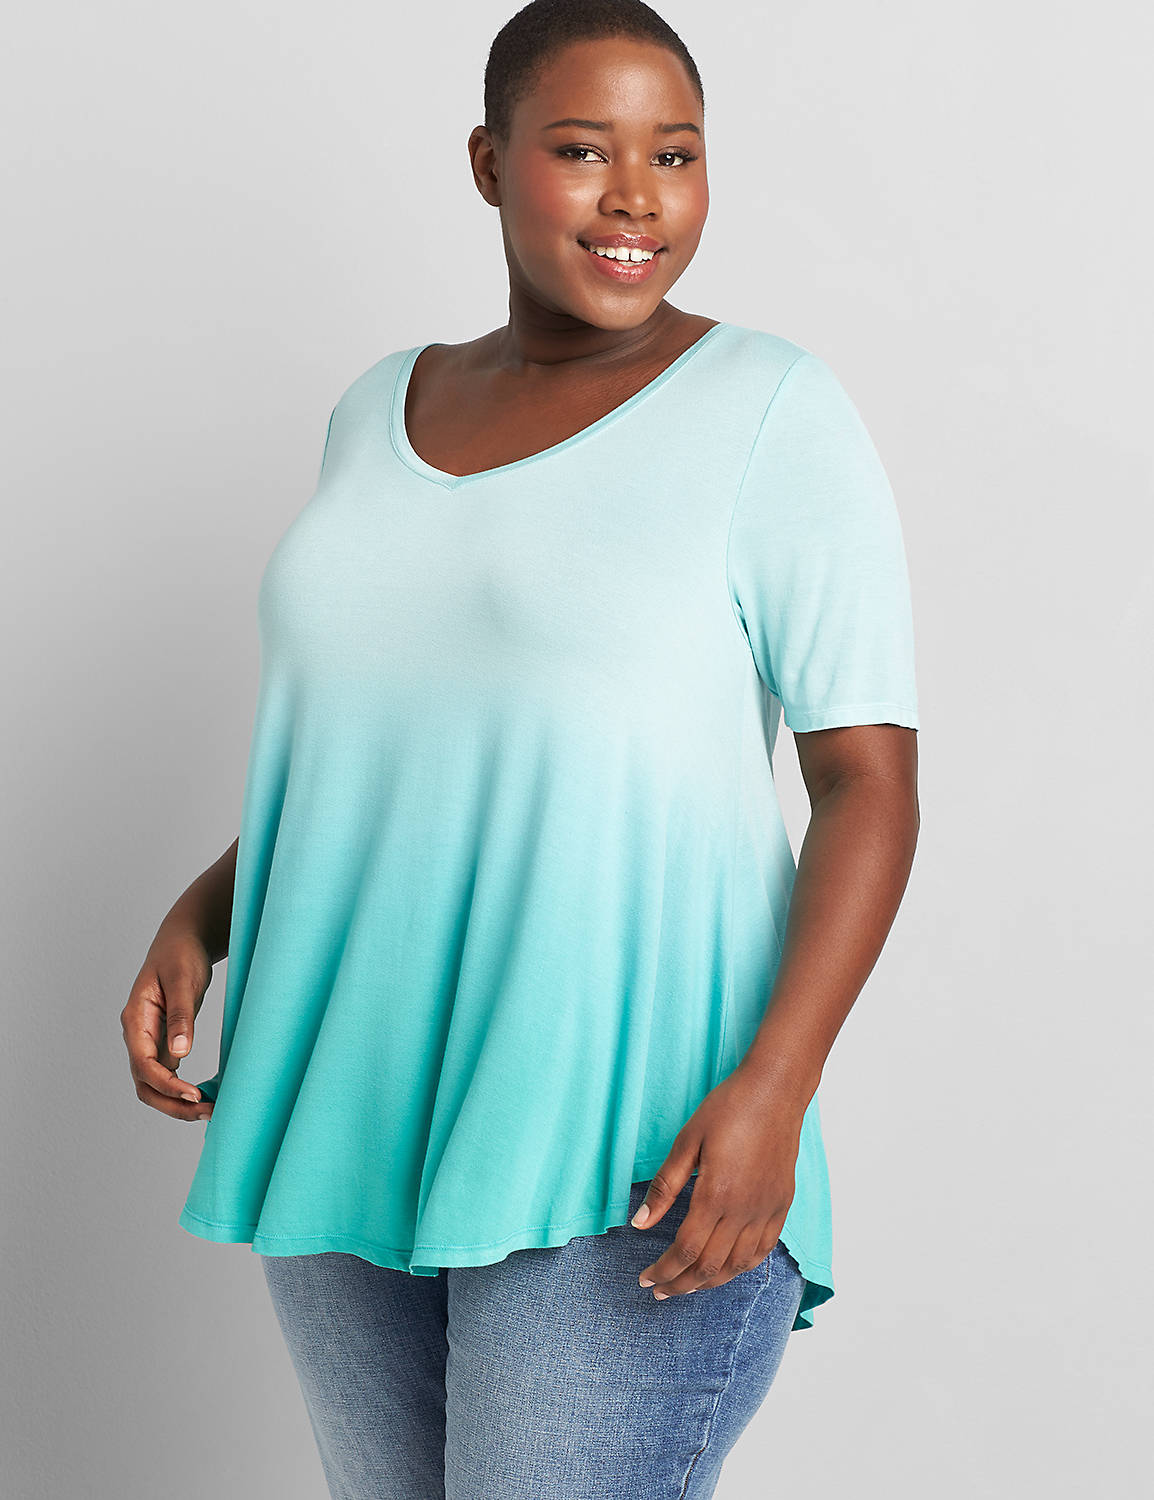 Perfect Sleeve Vneck Drapey Tunic 1118711:Teal Zeal CSI 0601628:14/16 Product Image 1